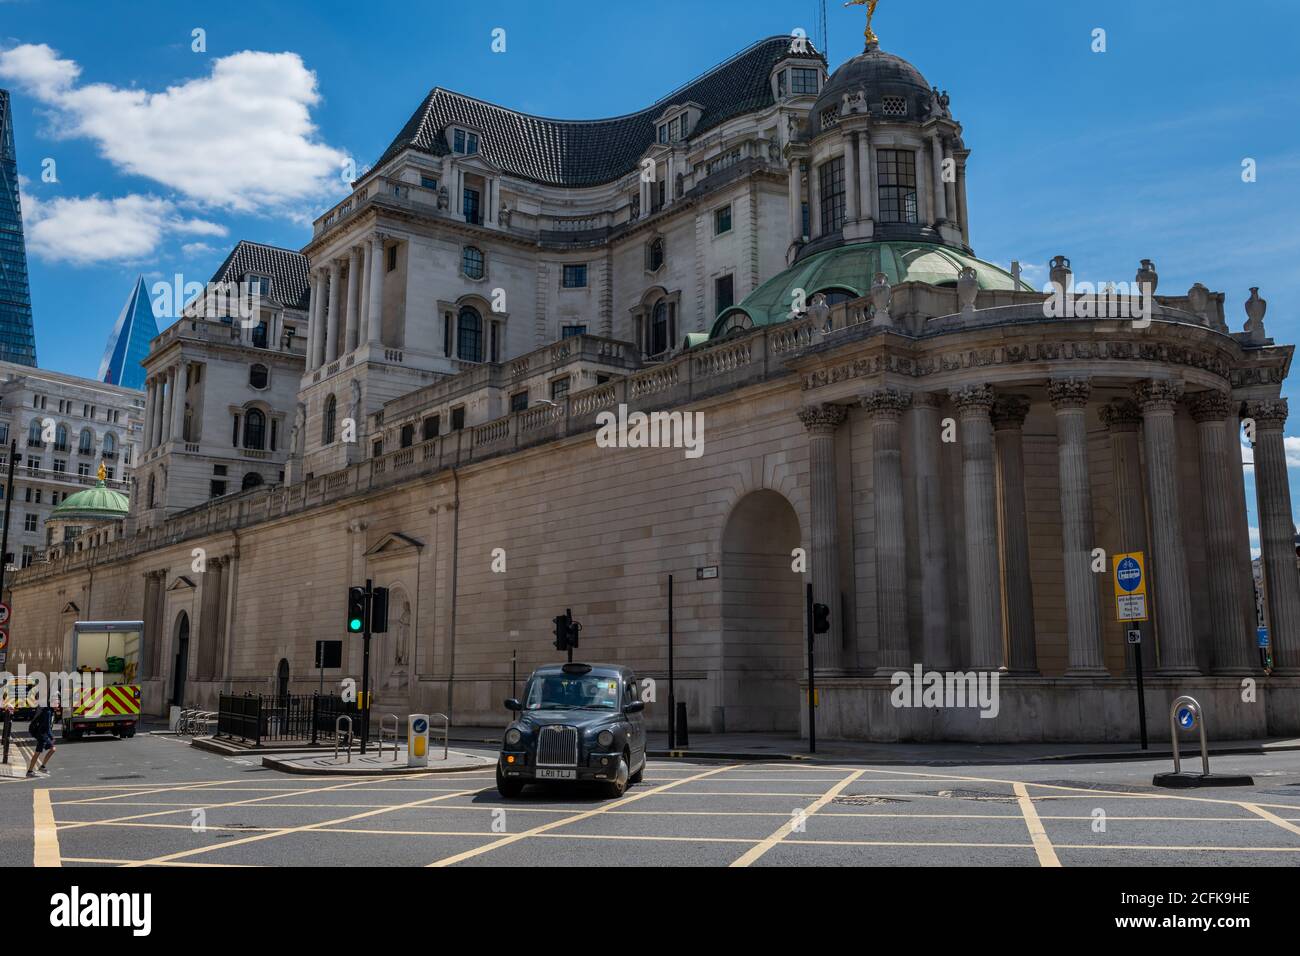 The Bank of England building on Threadneedle Street in the City of London. The central bank of the United Kingdom. Stock Photo